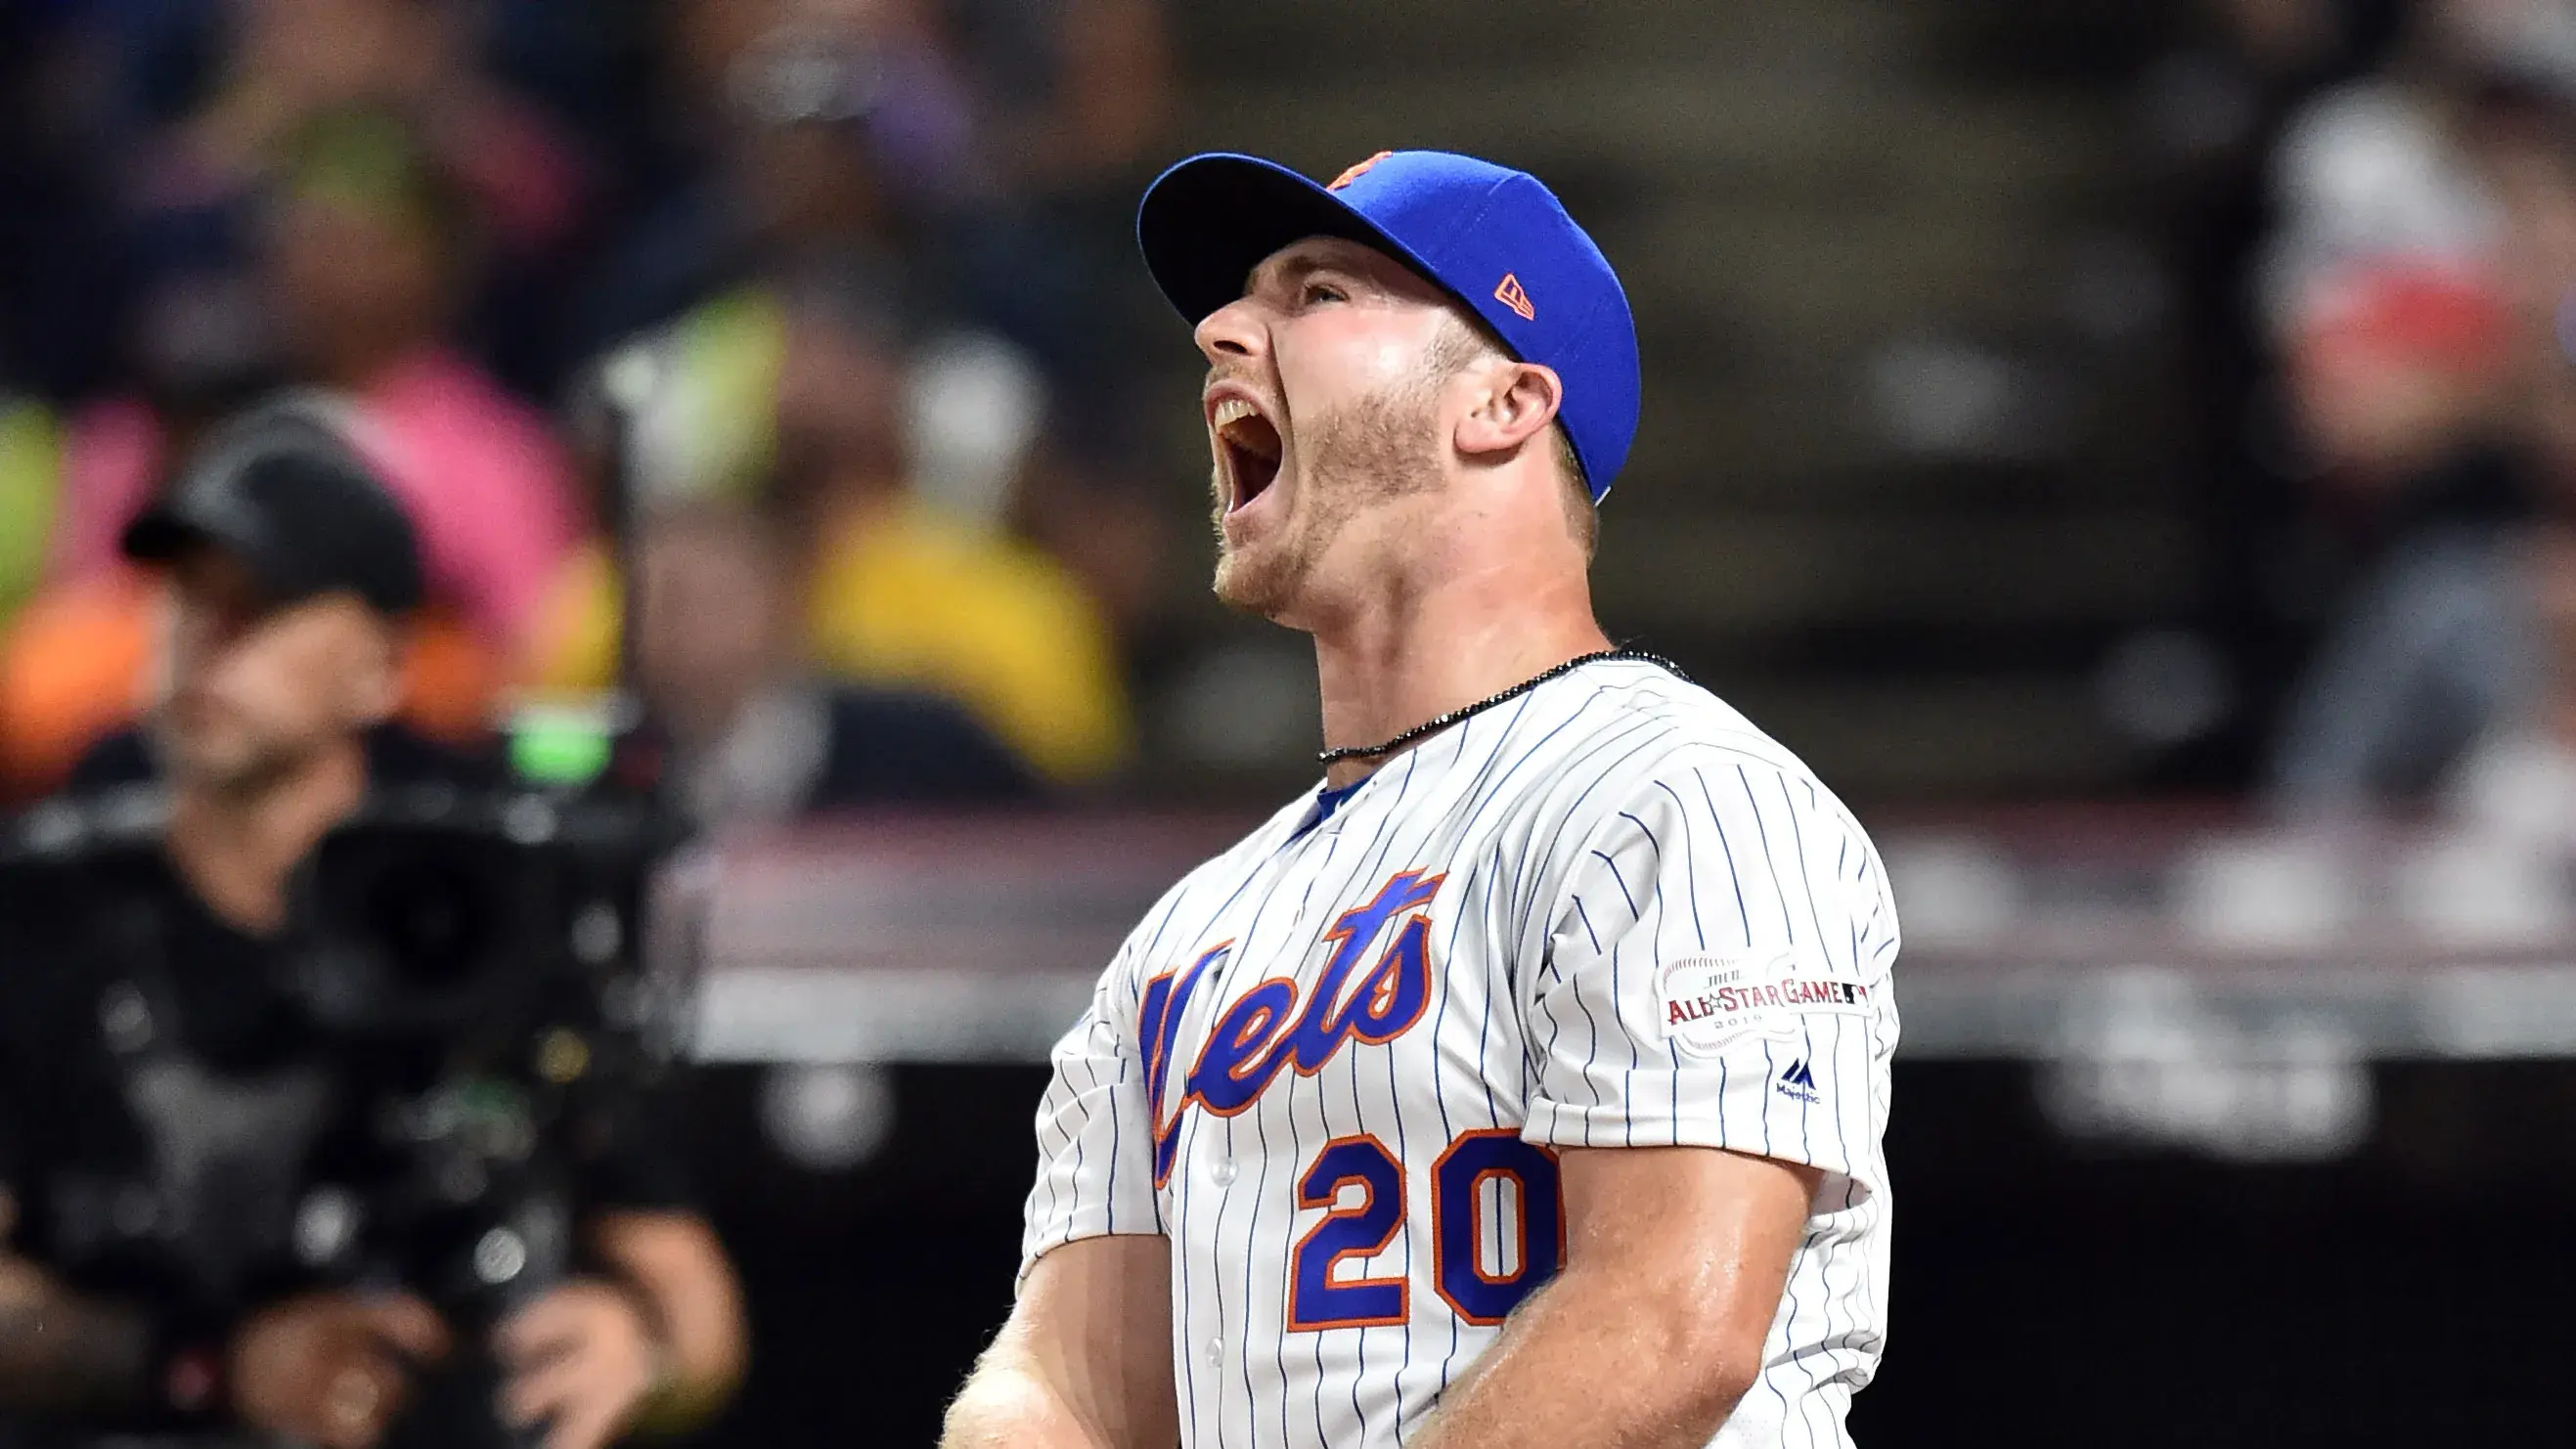 New York Mets first baseman Pete Alonso (20) reacts after the second round in the 2019 MLB Home Run Derby at Progressive Field. / Ken Blaze/USA TODAY